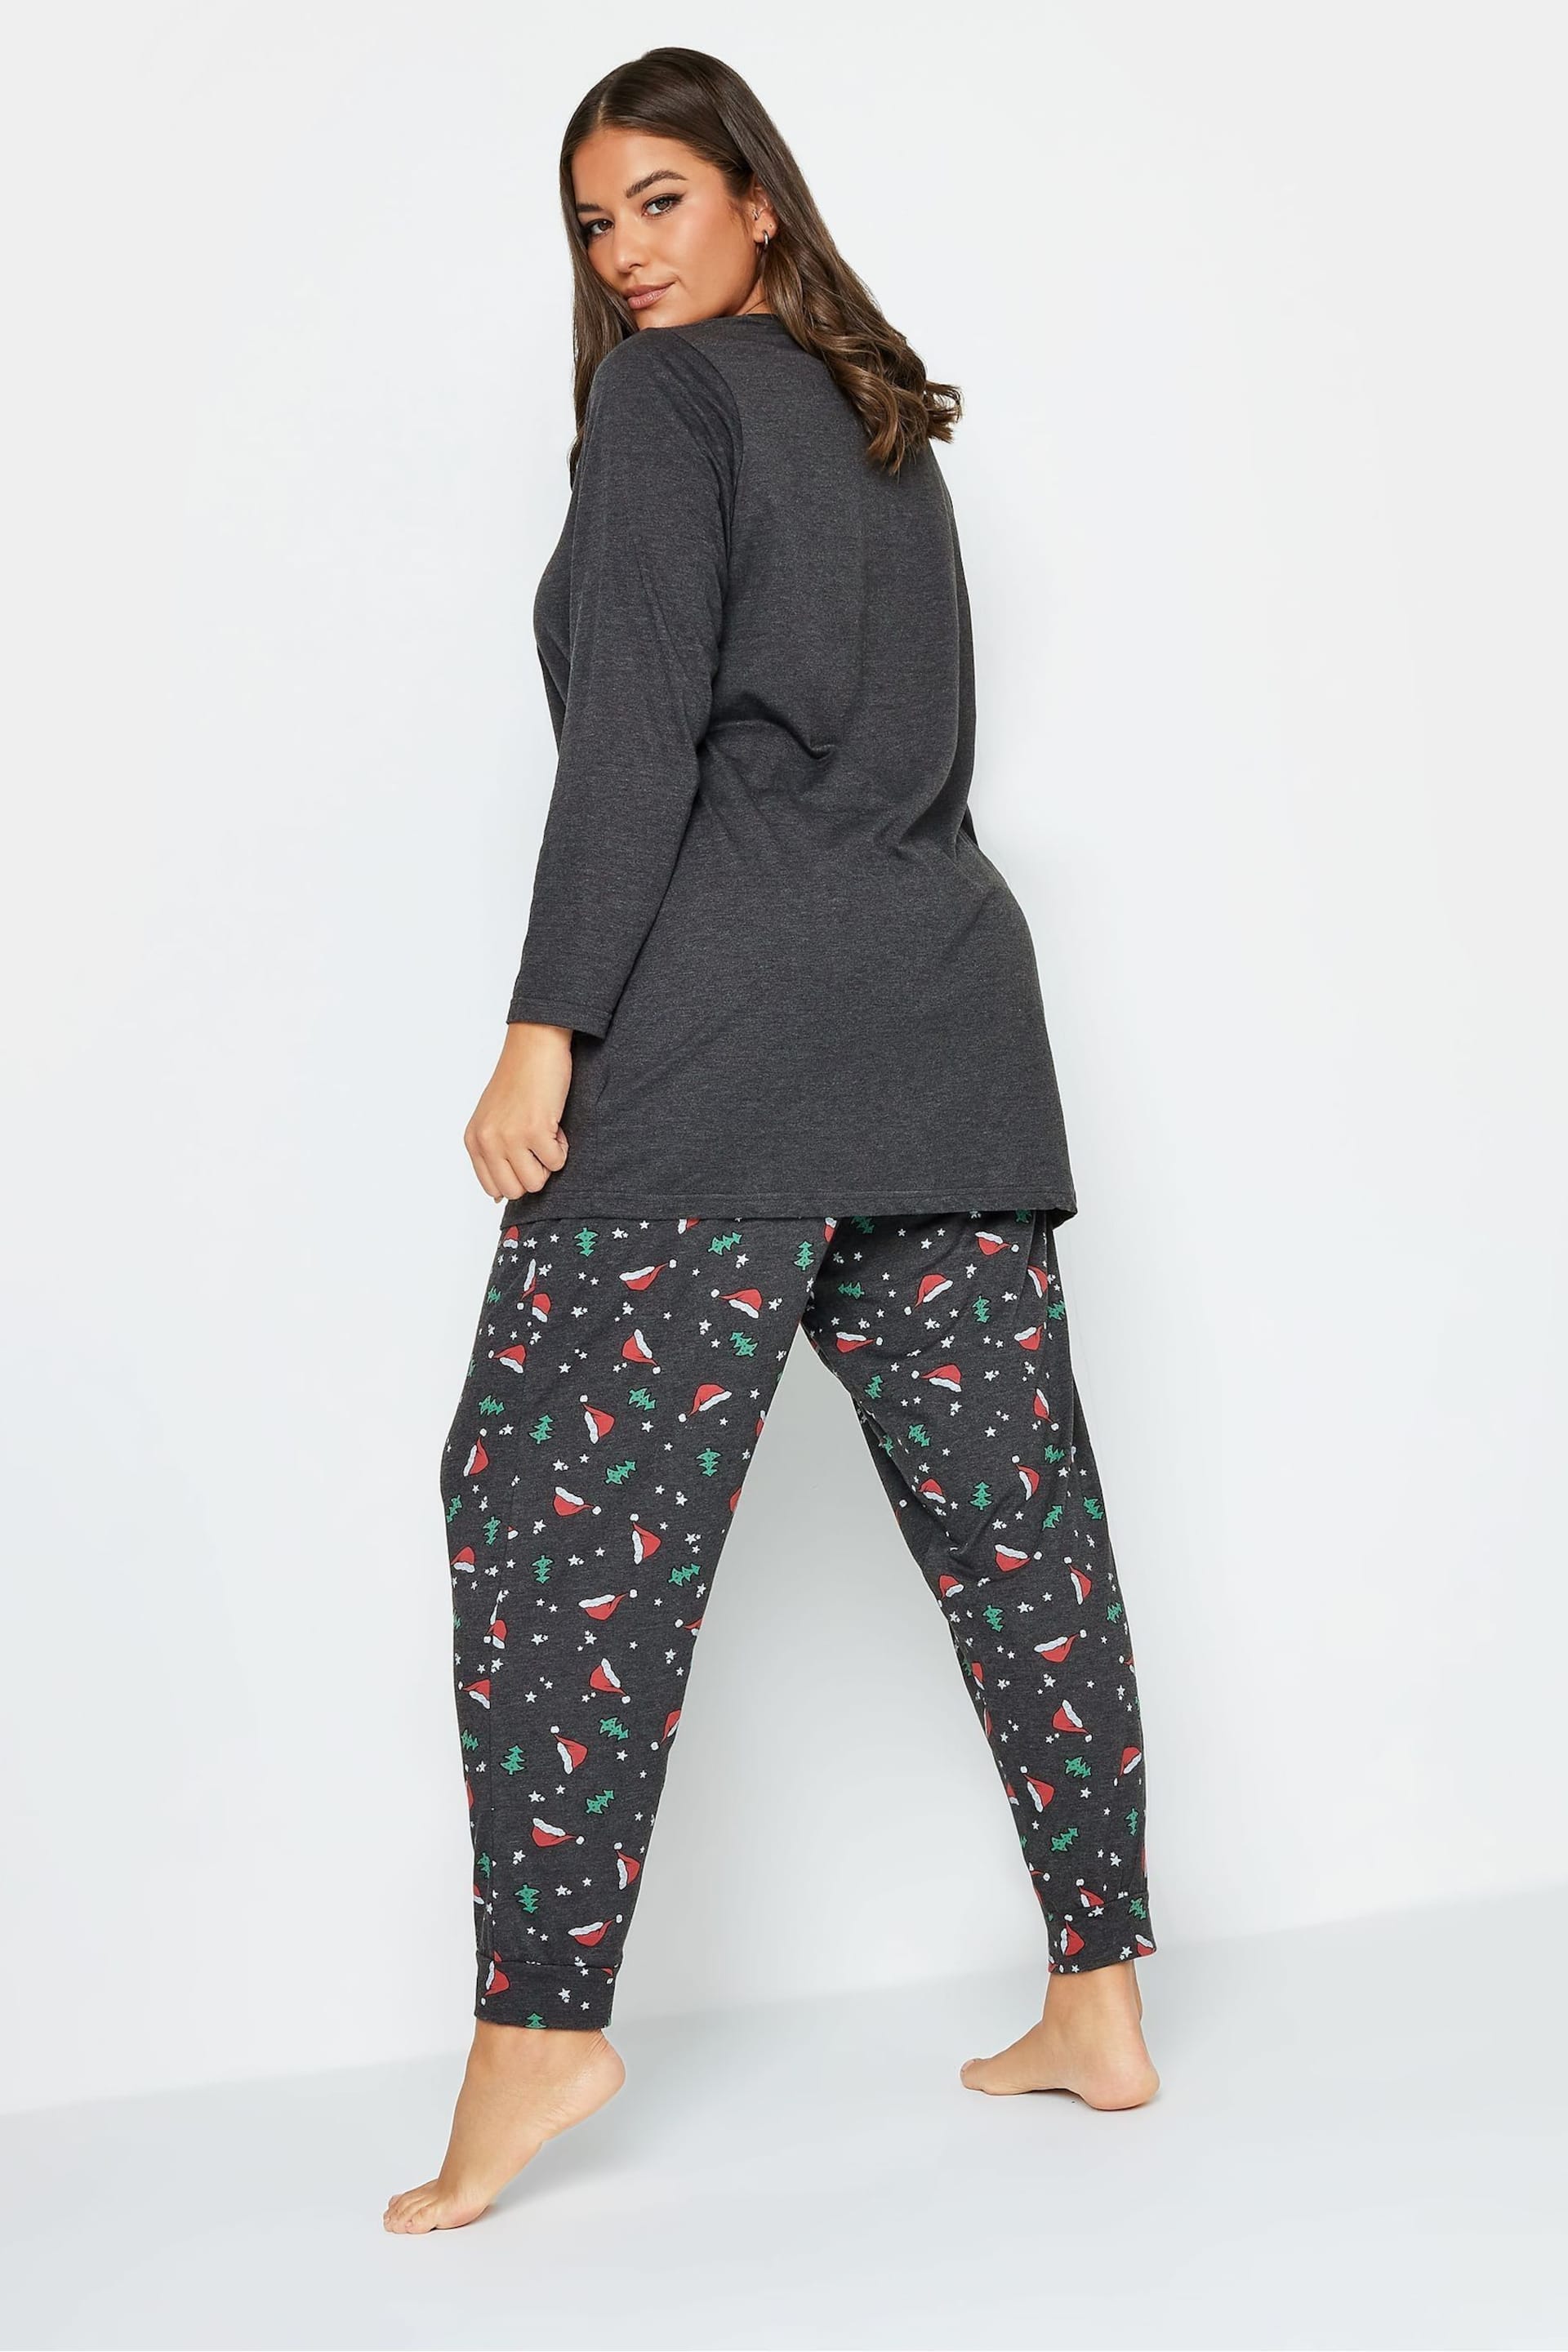 Yours Curve Grey Pugs In Blankets Long Sleeve Cuffed Pyjamas Set - Image 2 of 4